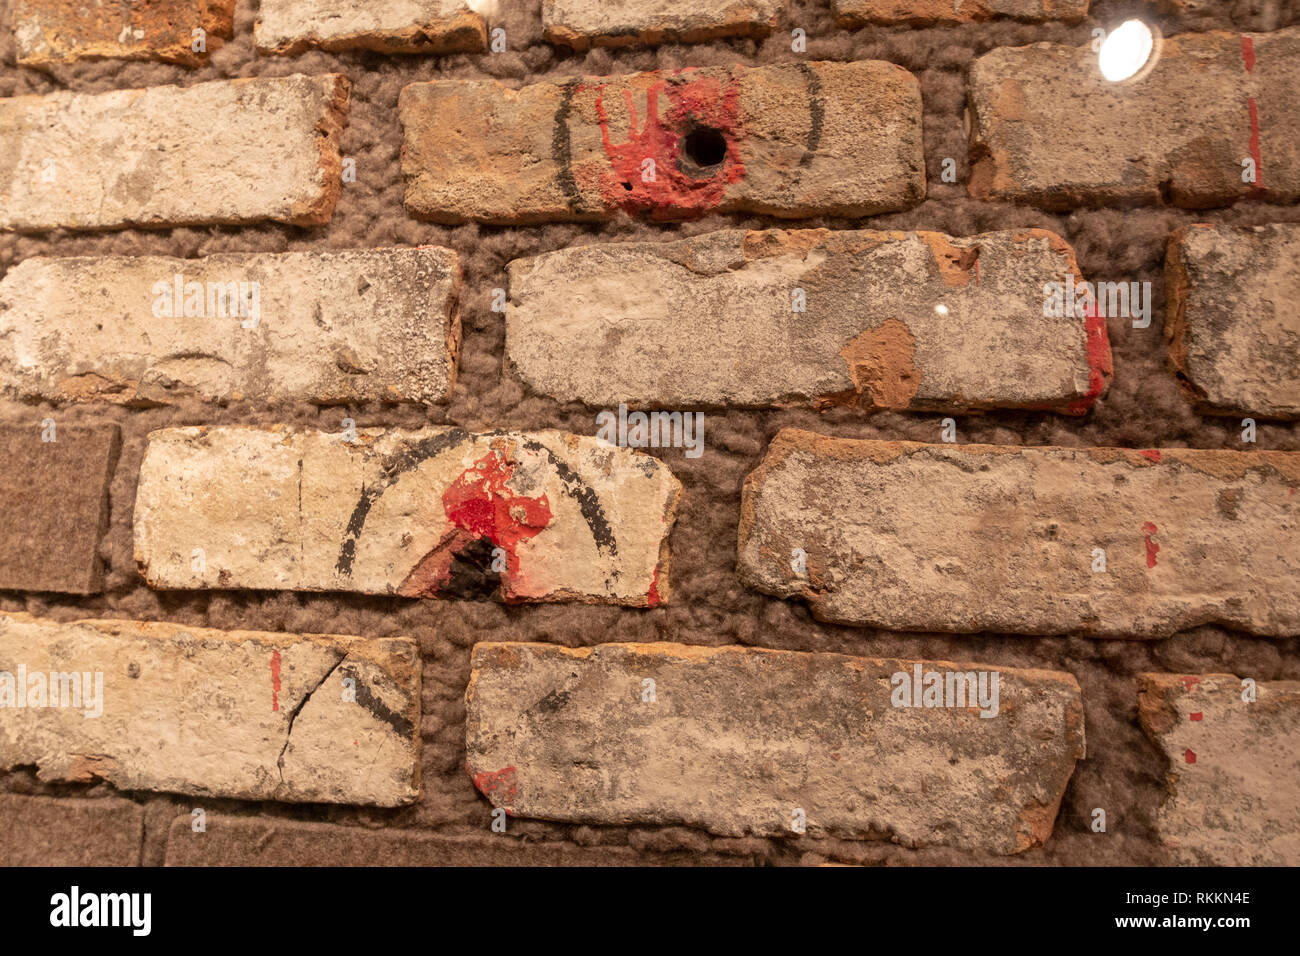 The Valentines Day Massacre Wall (from S-M-C Cartage Company warehouse at 2122 North Clark St, Chicago) on display in the Mob Museum, Las Vegas, Stock Photo